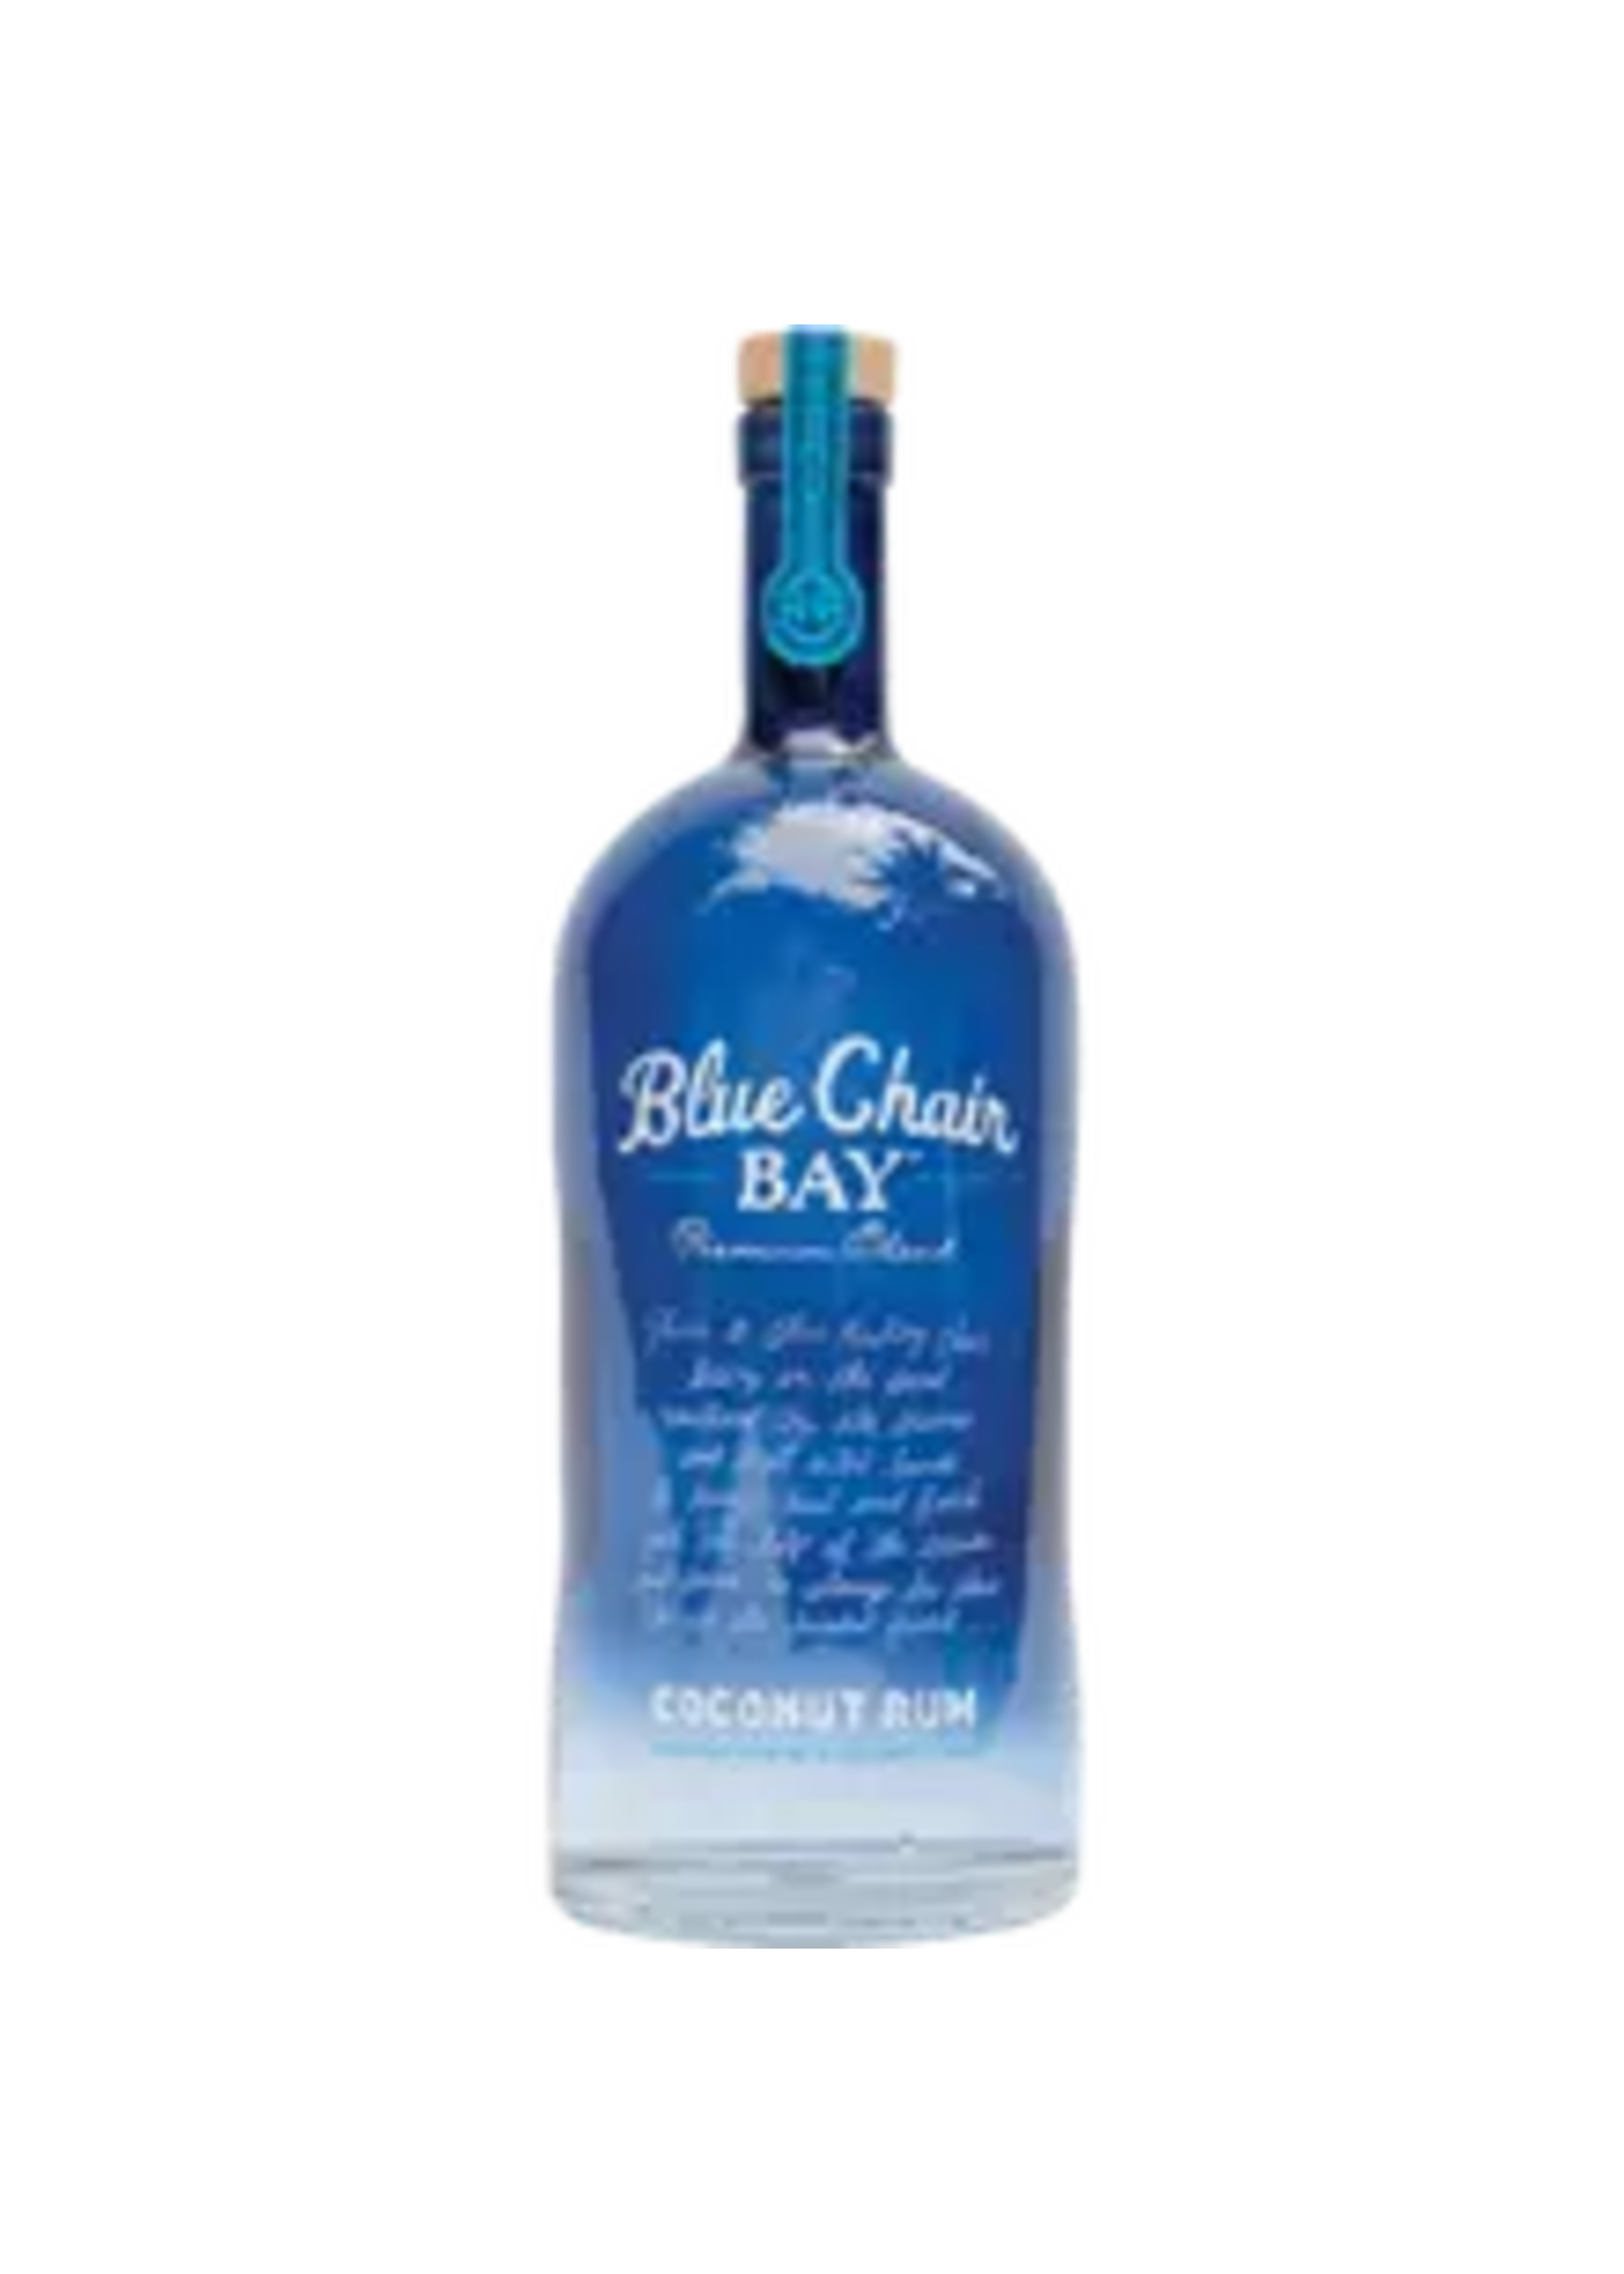 Blue Chair Bay Blue Chair Bay Coconut Rum 52.6Proof 1.75 Ltr